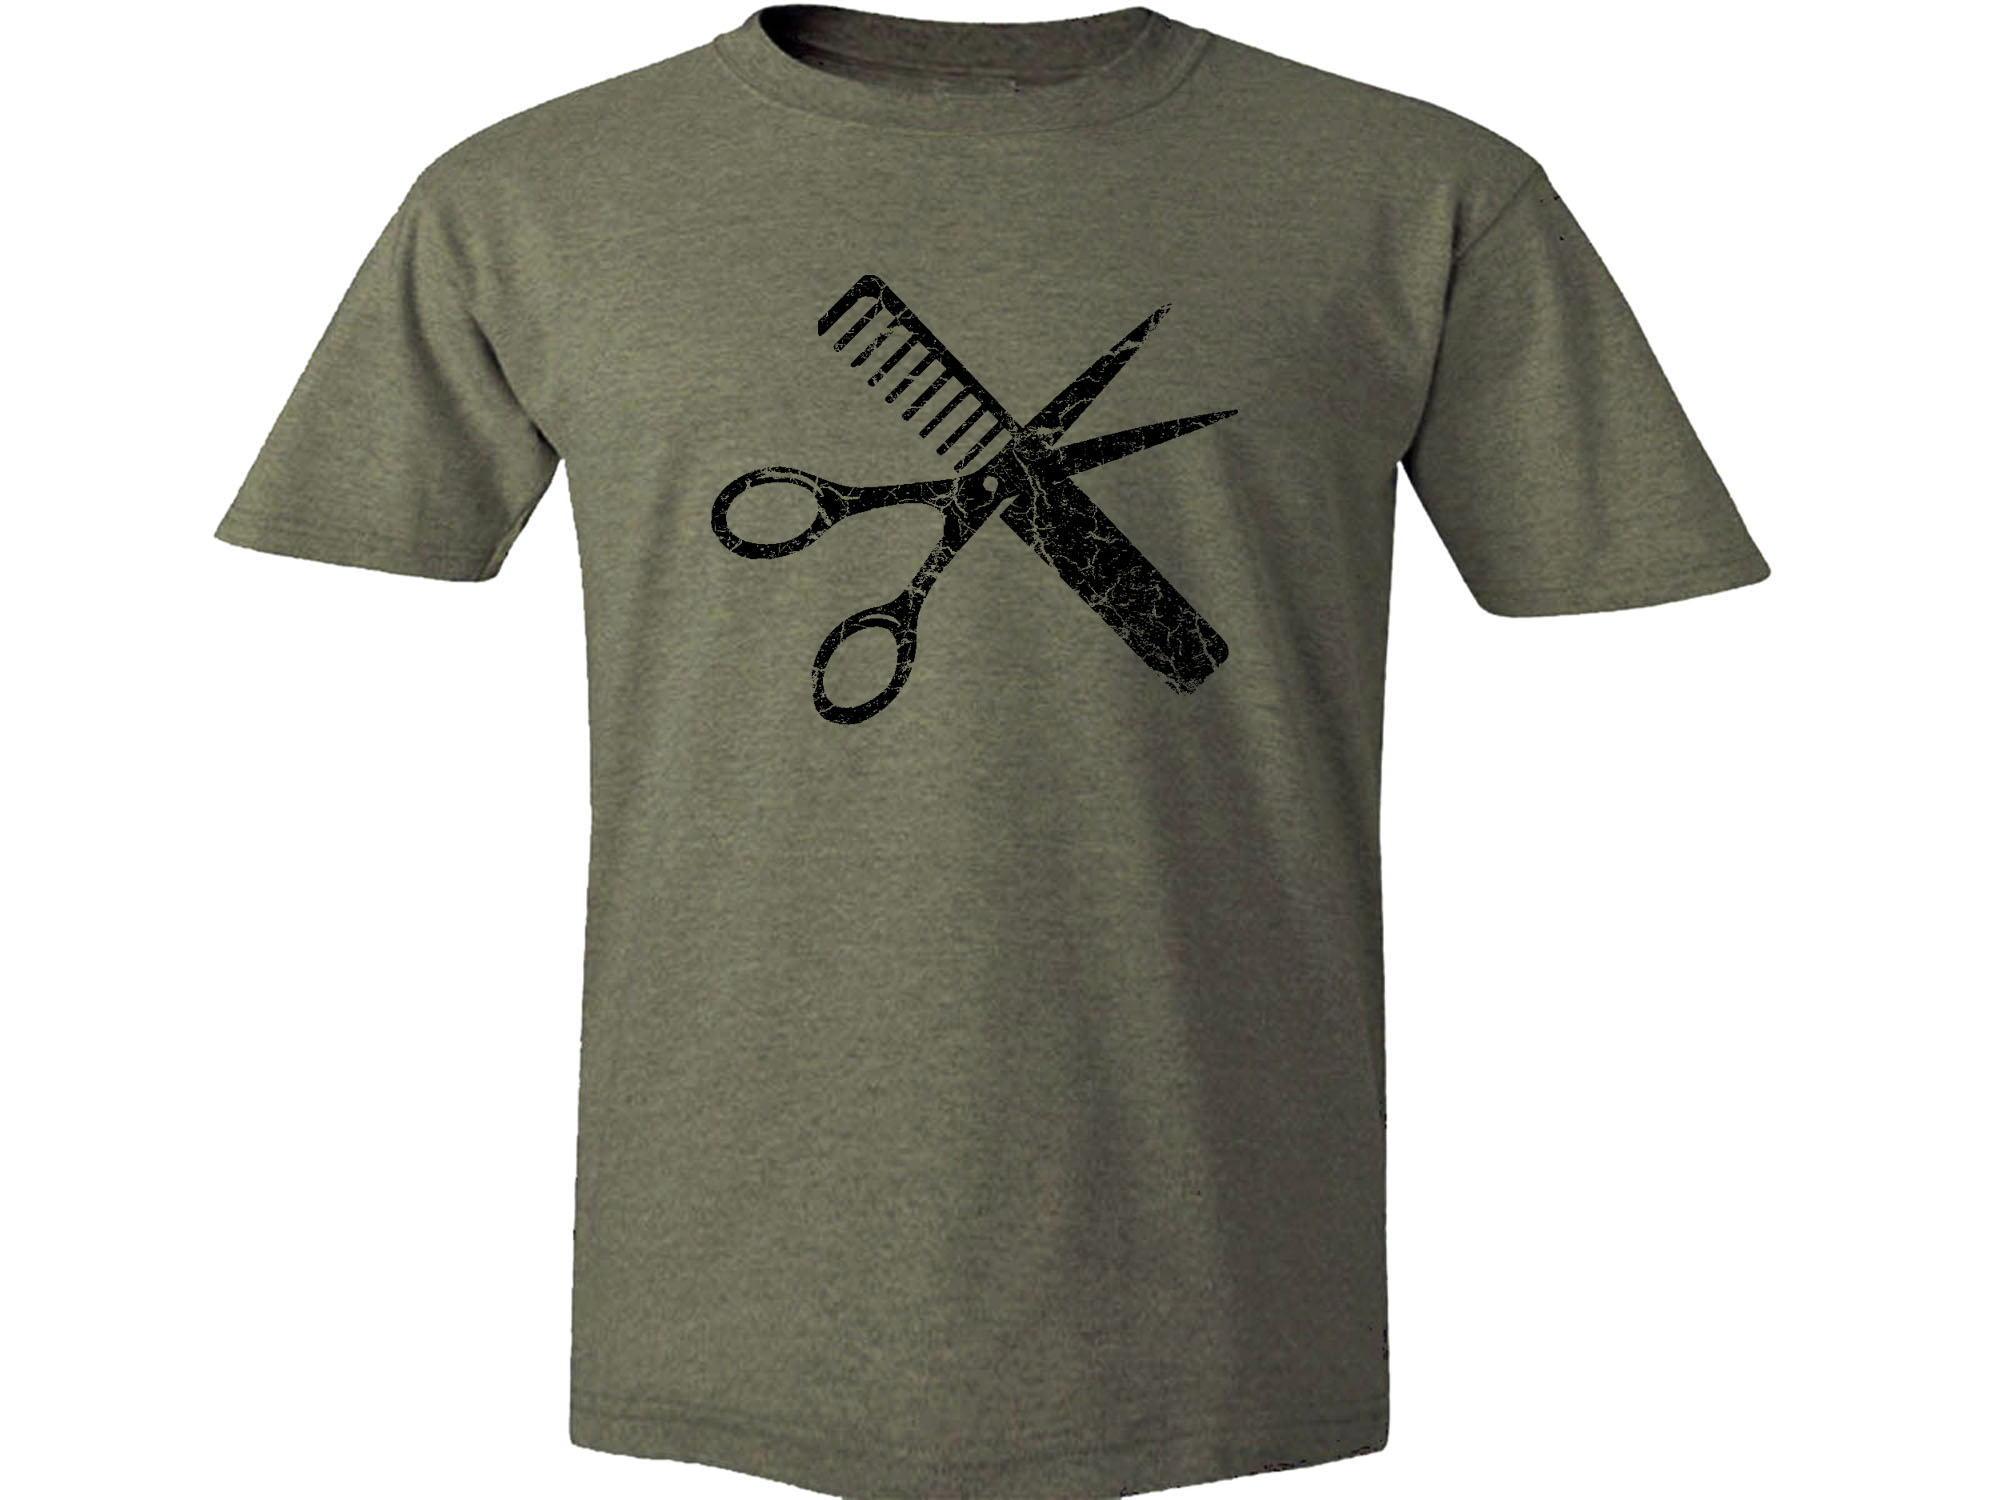 Hairstylist barber t-shirt